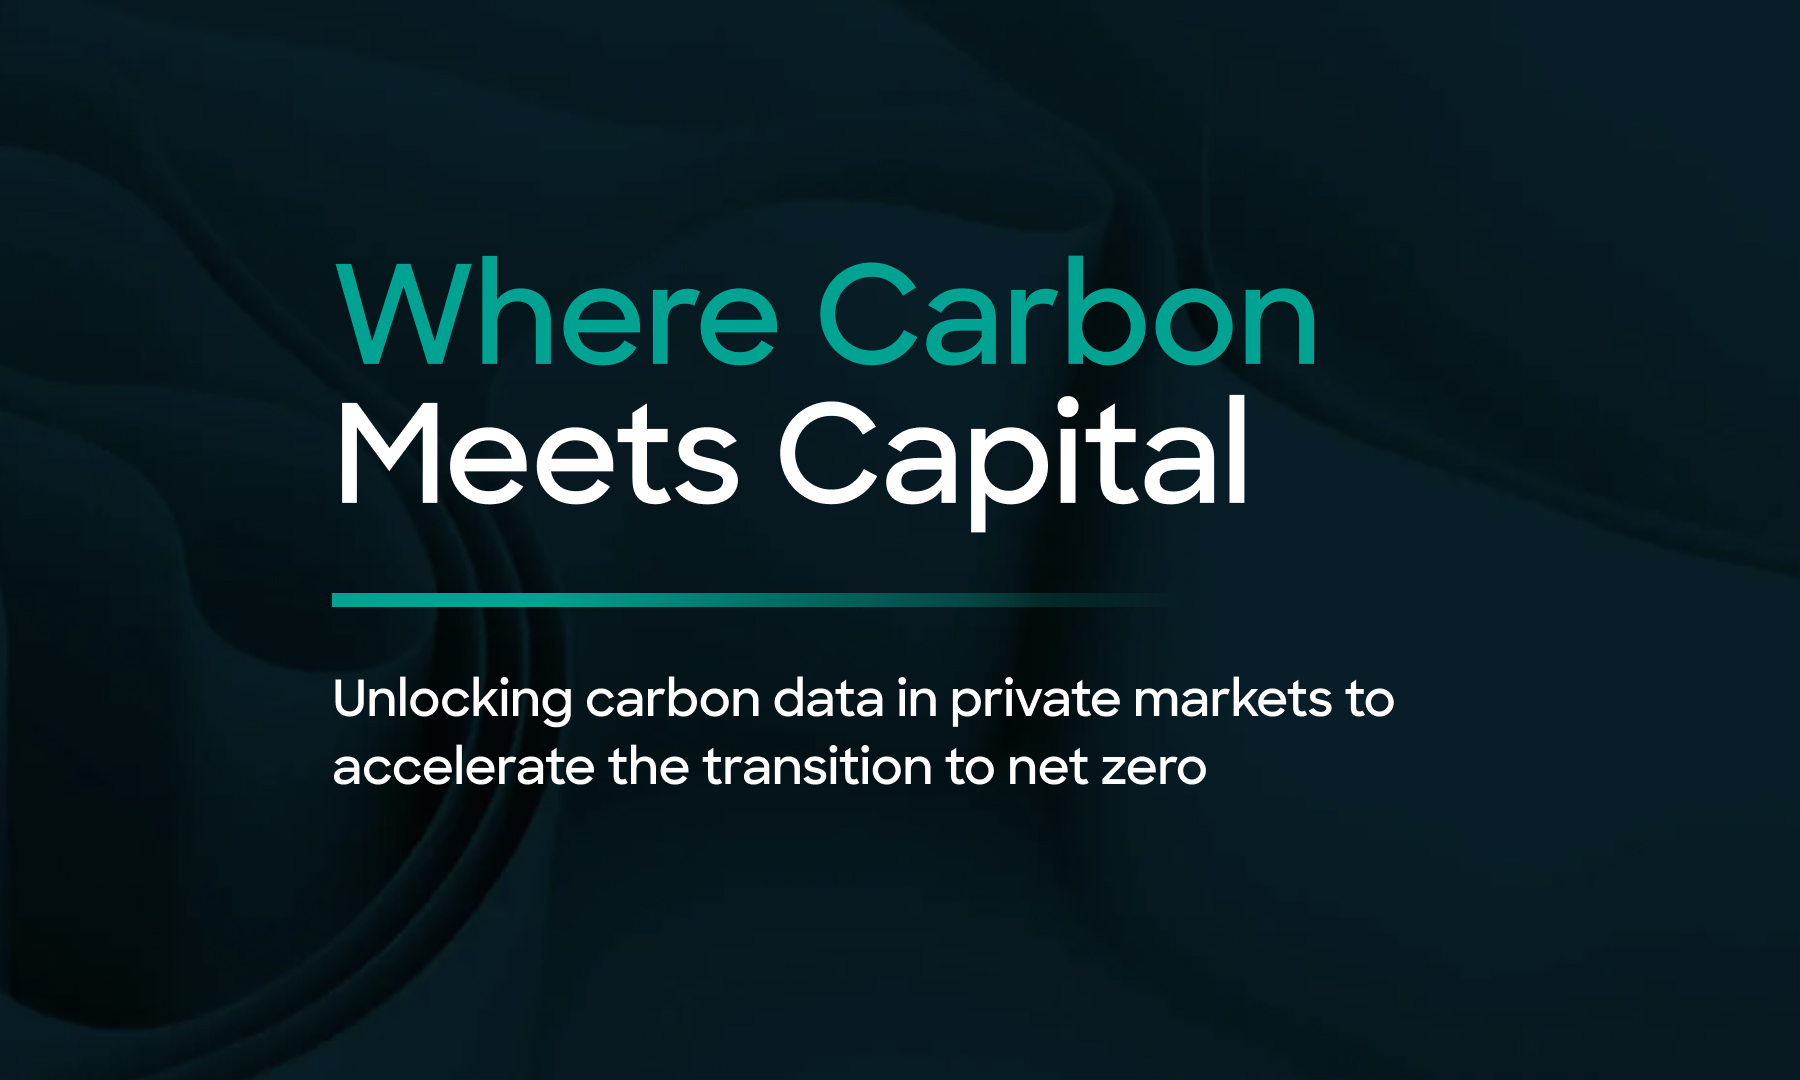 Unlocking carbon data in private markets to accelerate the transition to net zero featured image